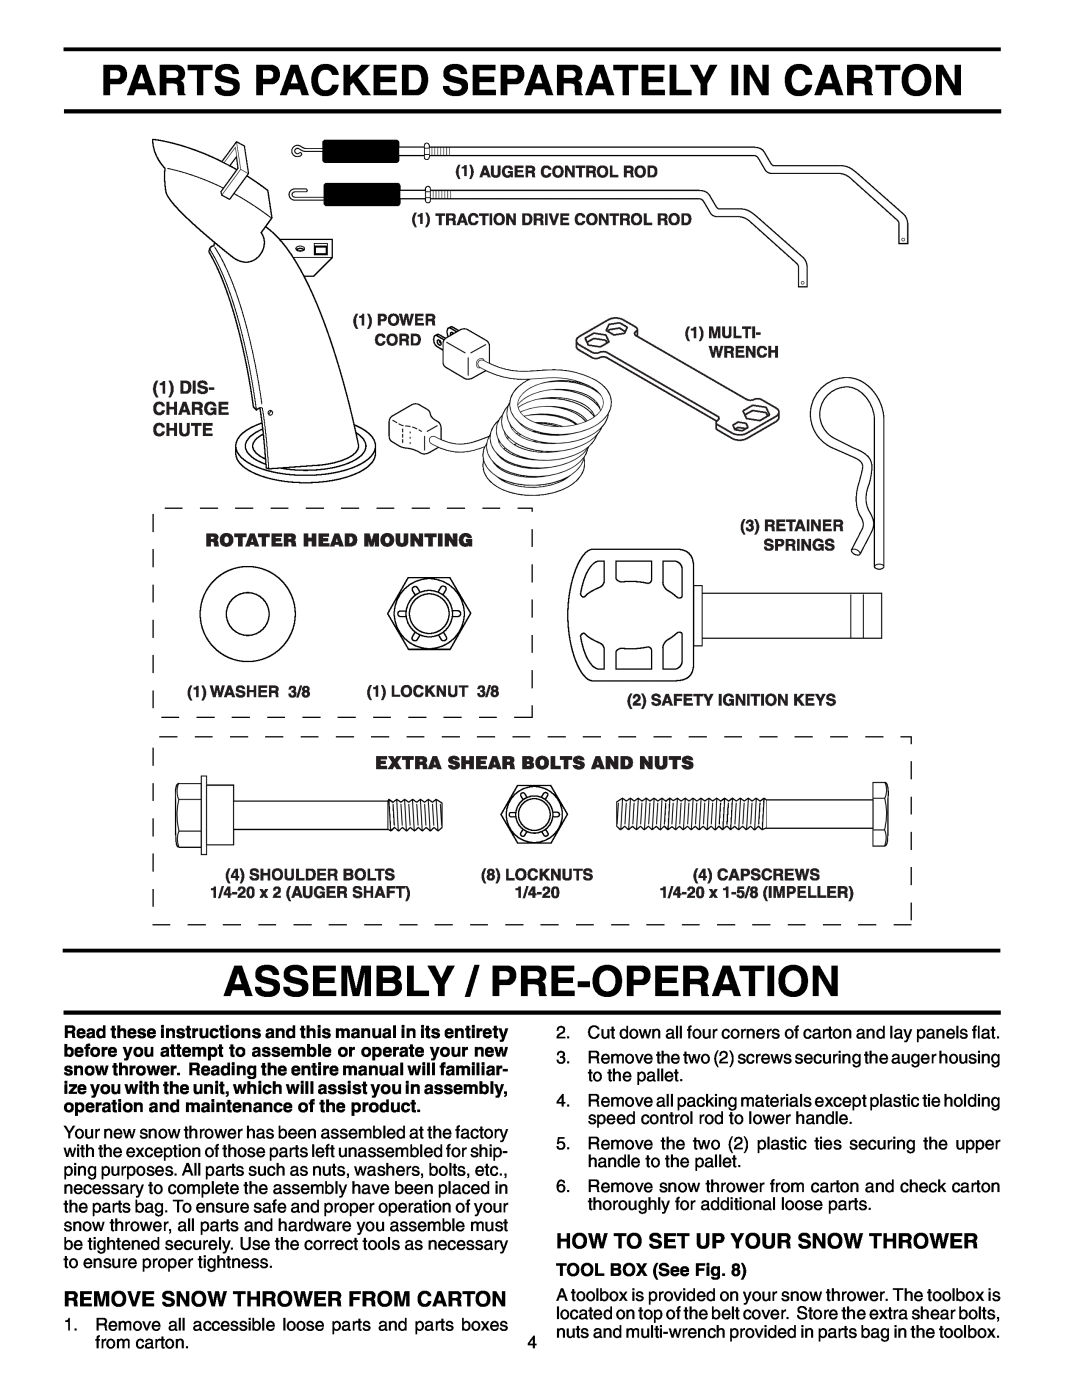 Poulan 199375 owner manual Parts Packed Separately In Carton, Assembly / Pre-Operation, How To Set Up Your Snow Thrower 